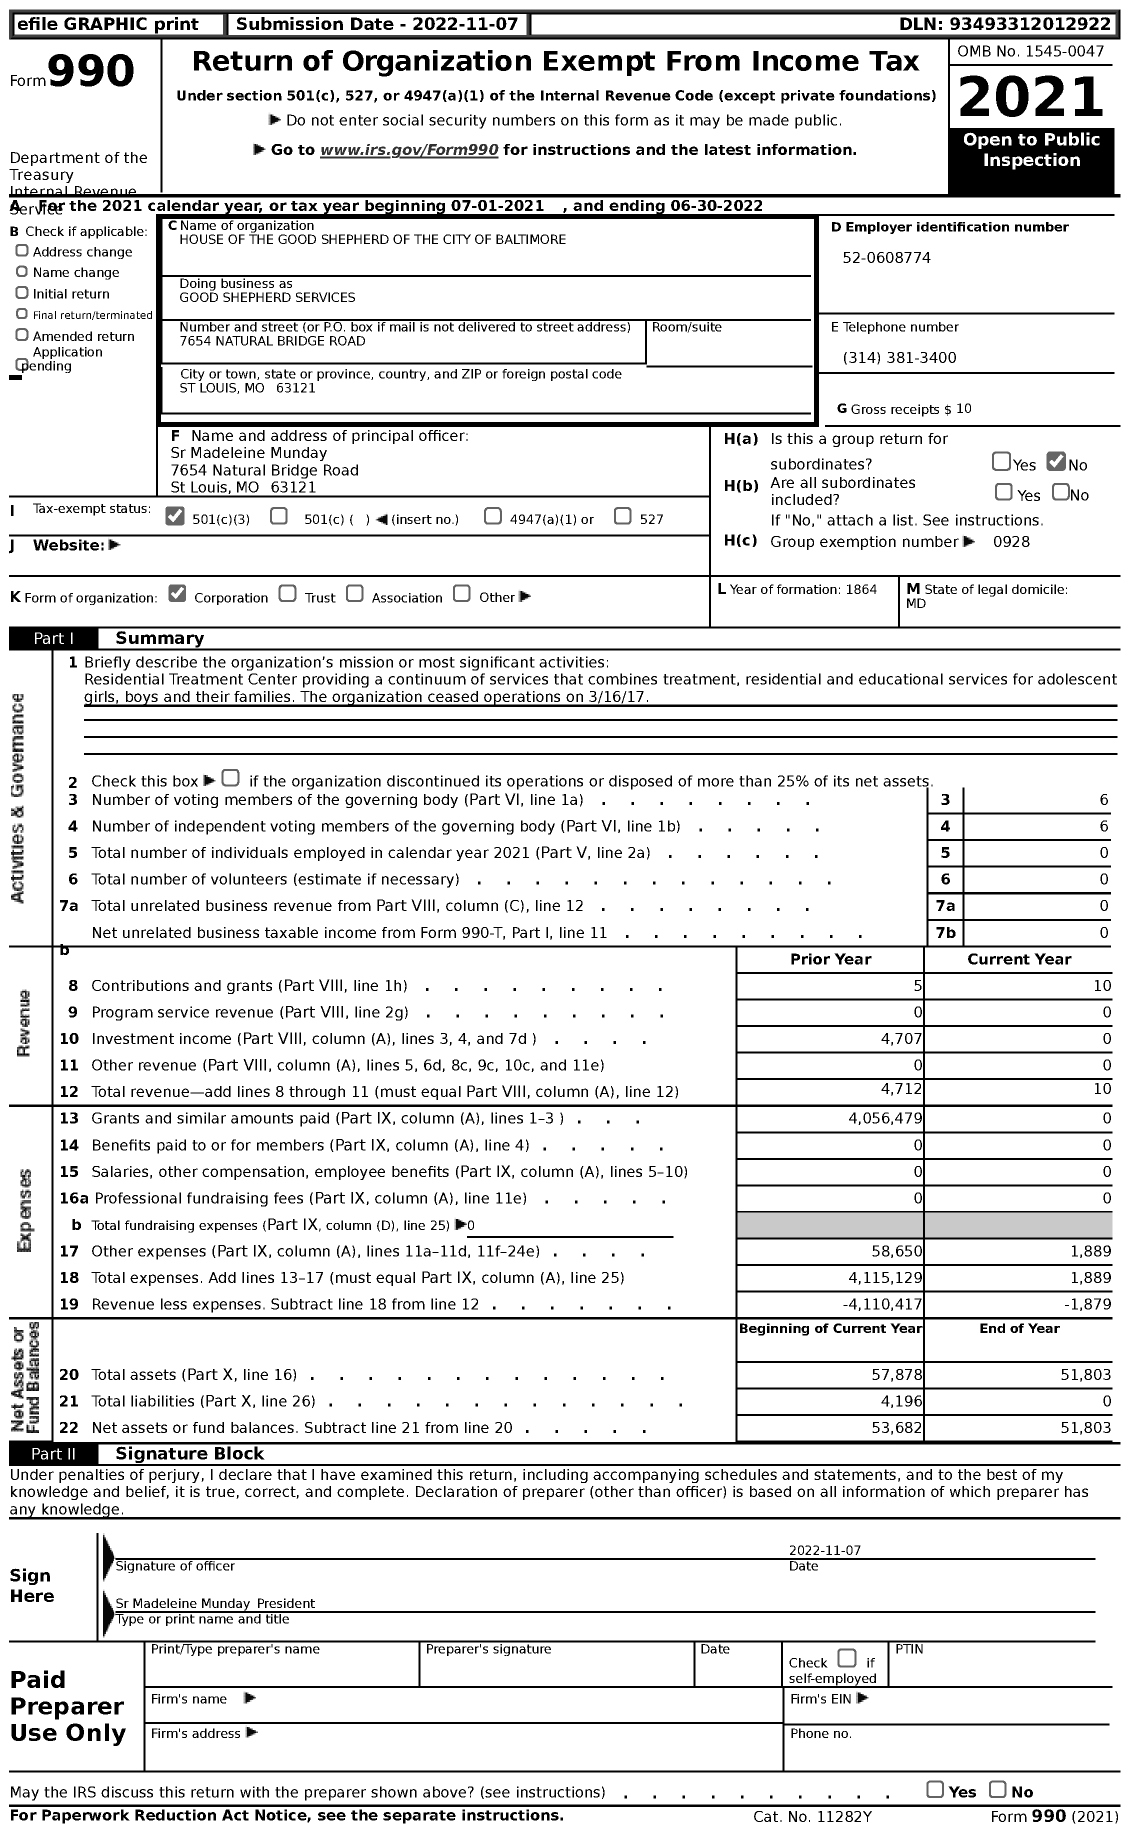 Image of first page of 2021 Form 990 for Good Shepherd Services / House of the Good Shepherd of the City of Baltimore (GSS)